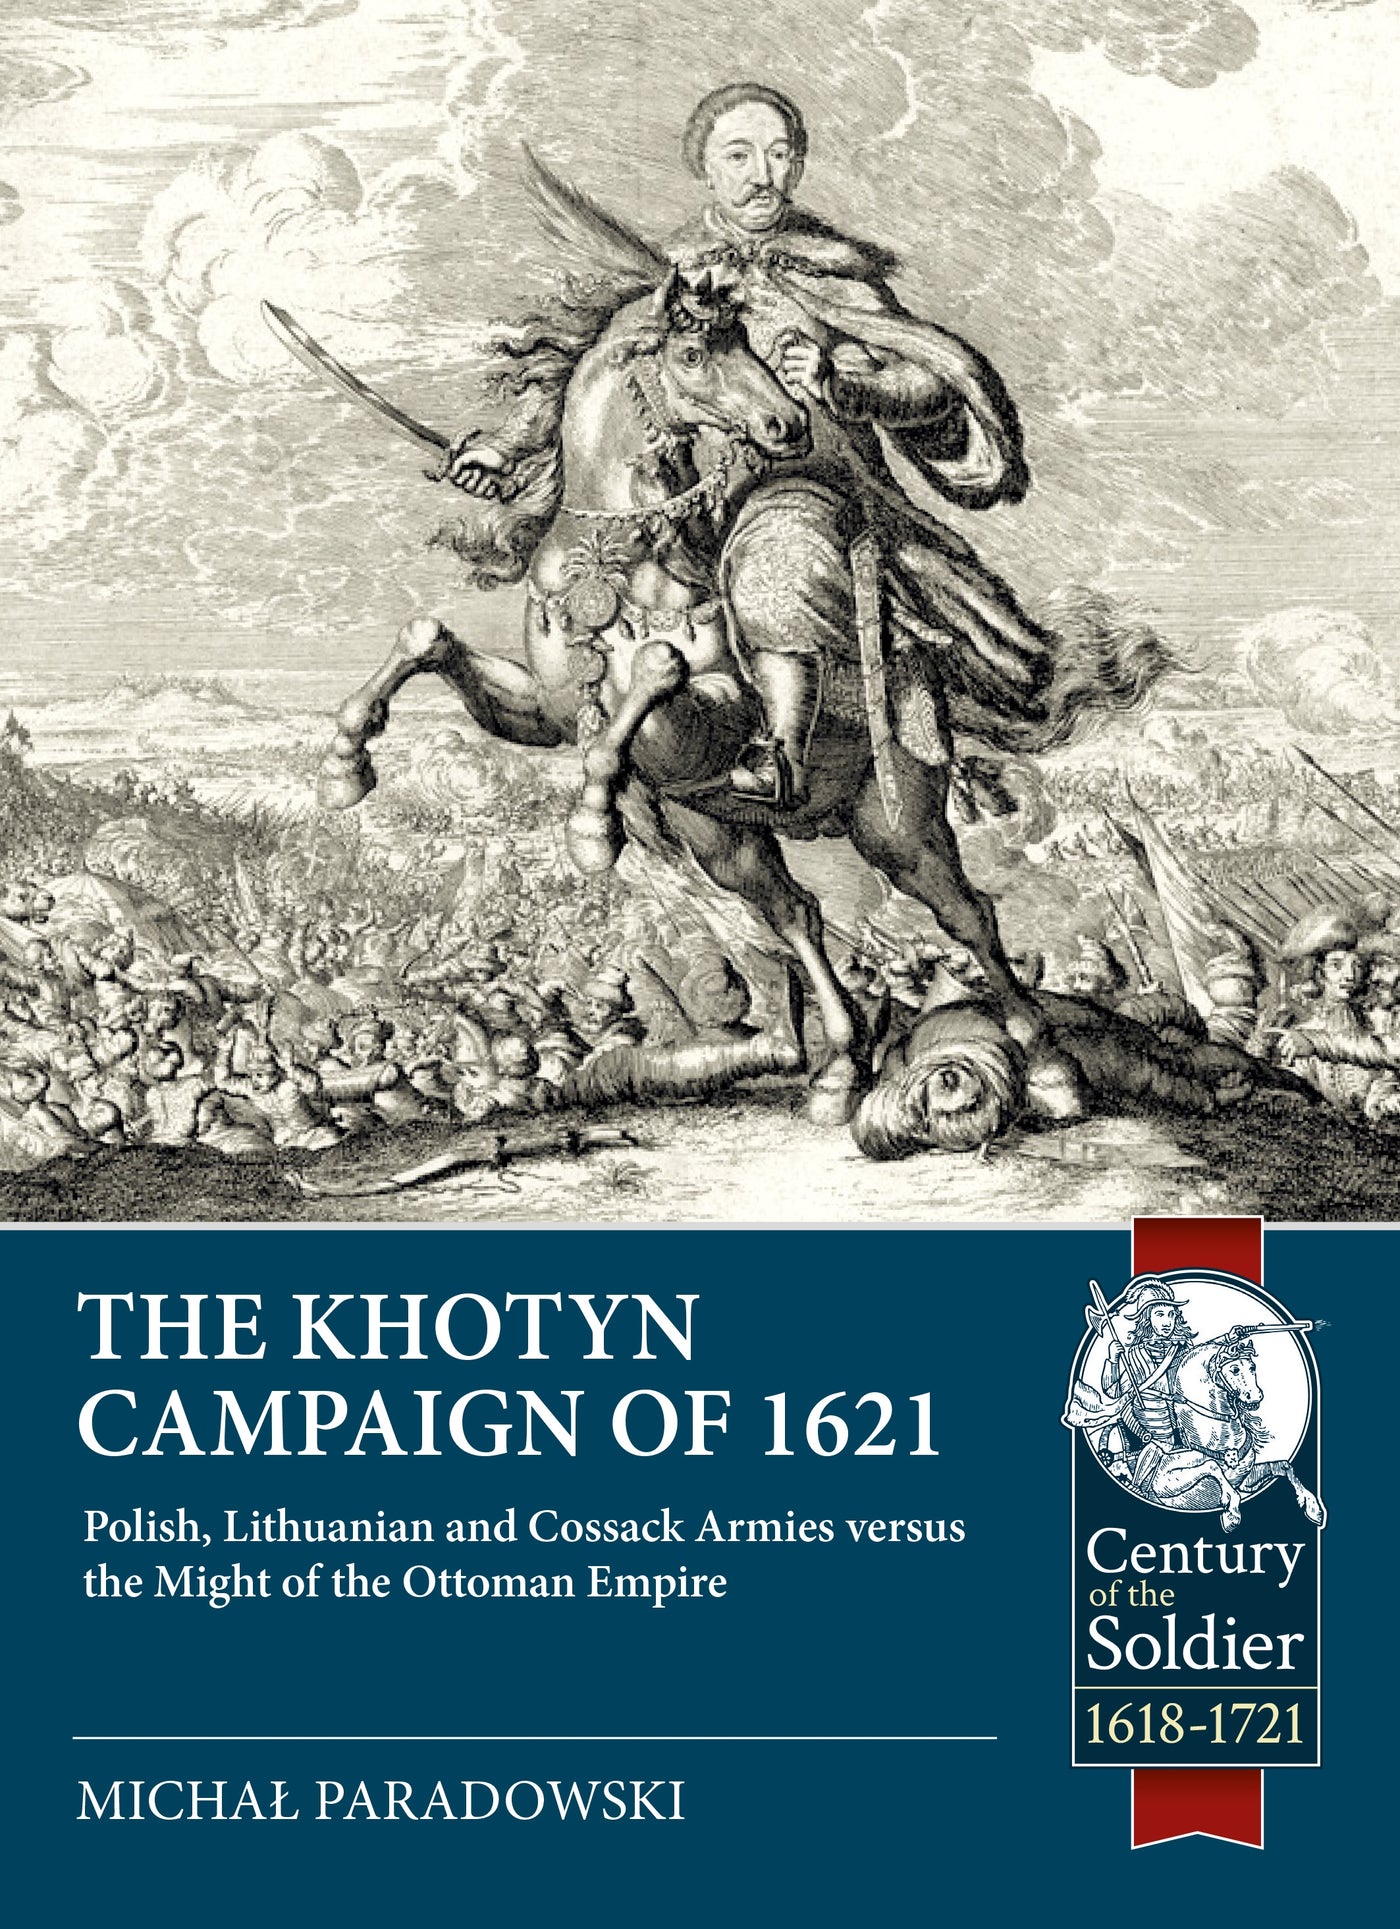 The Khotyn campaign of 1621